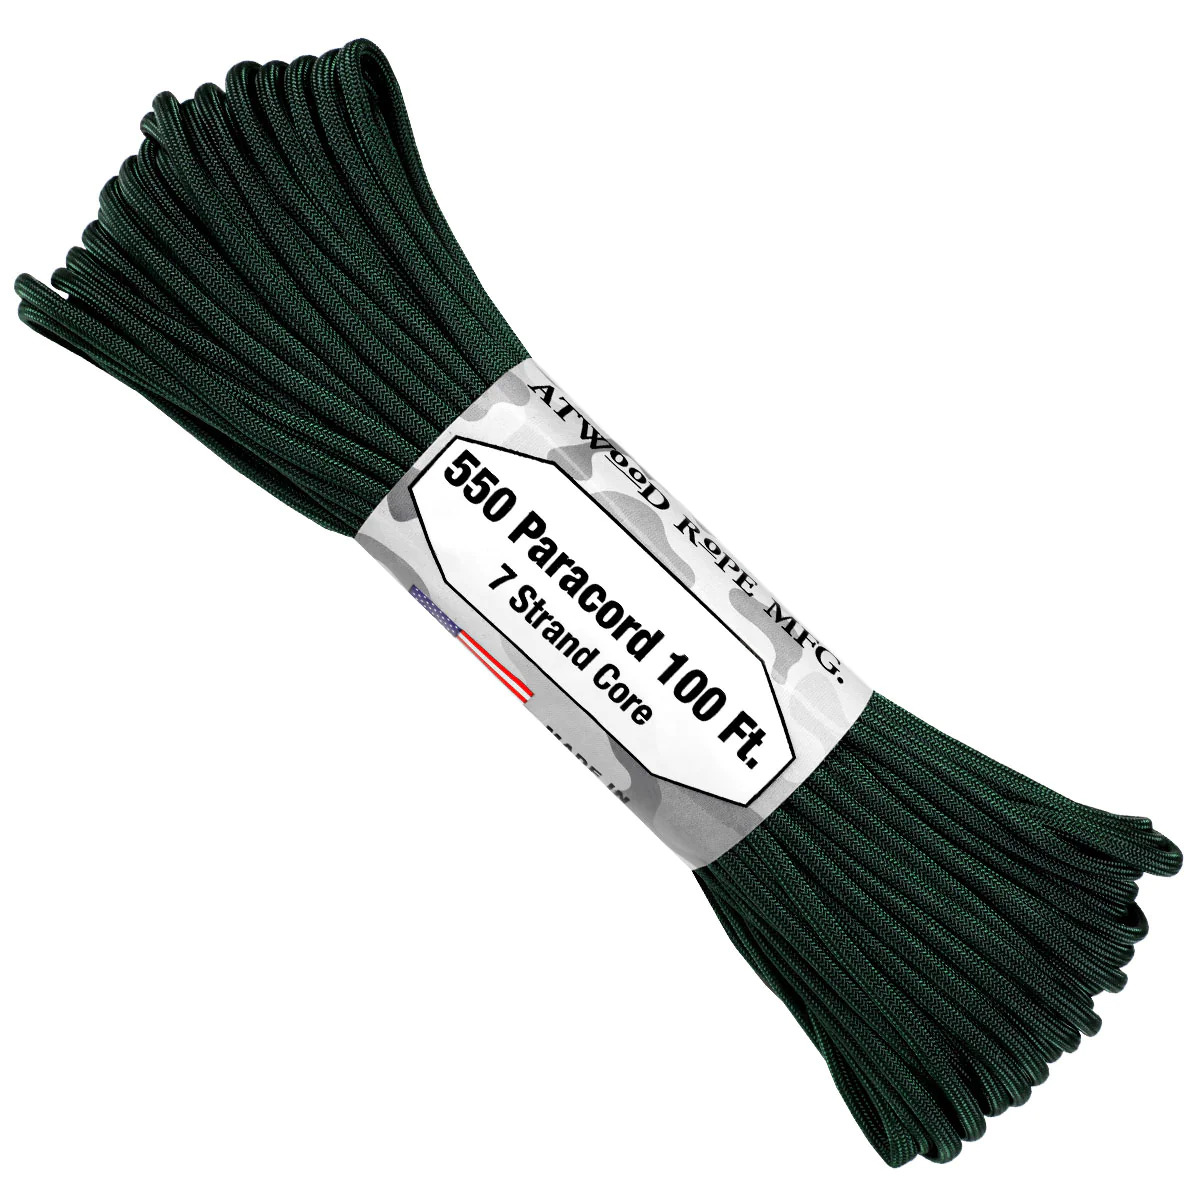 PARACORD 550LB HUNTER VERDE MUSGO (30M) - ATWOOD